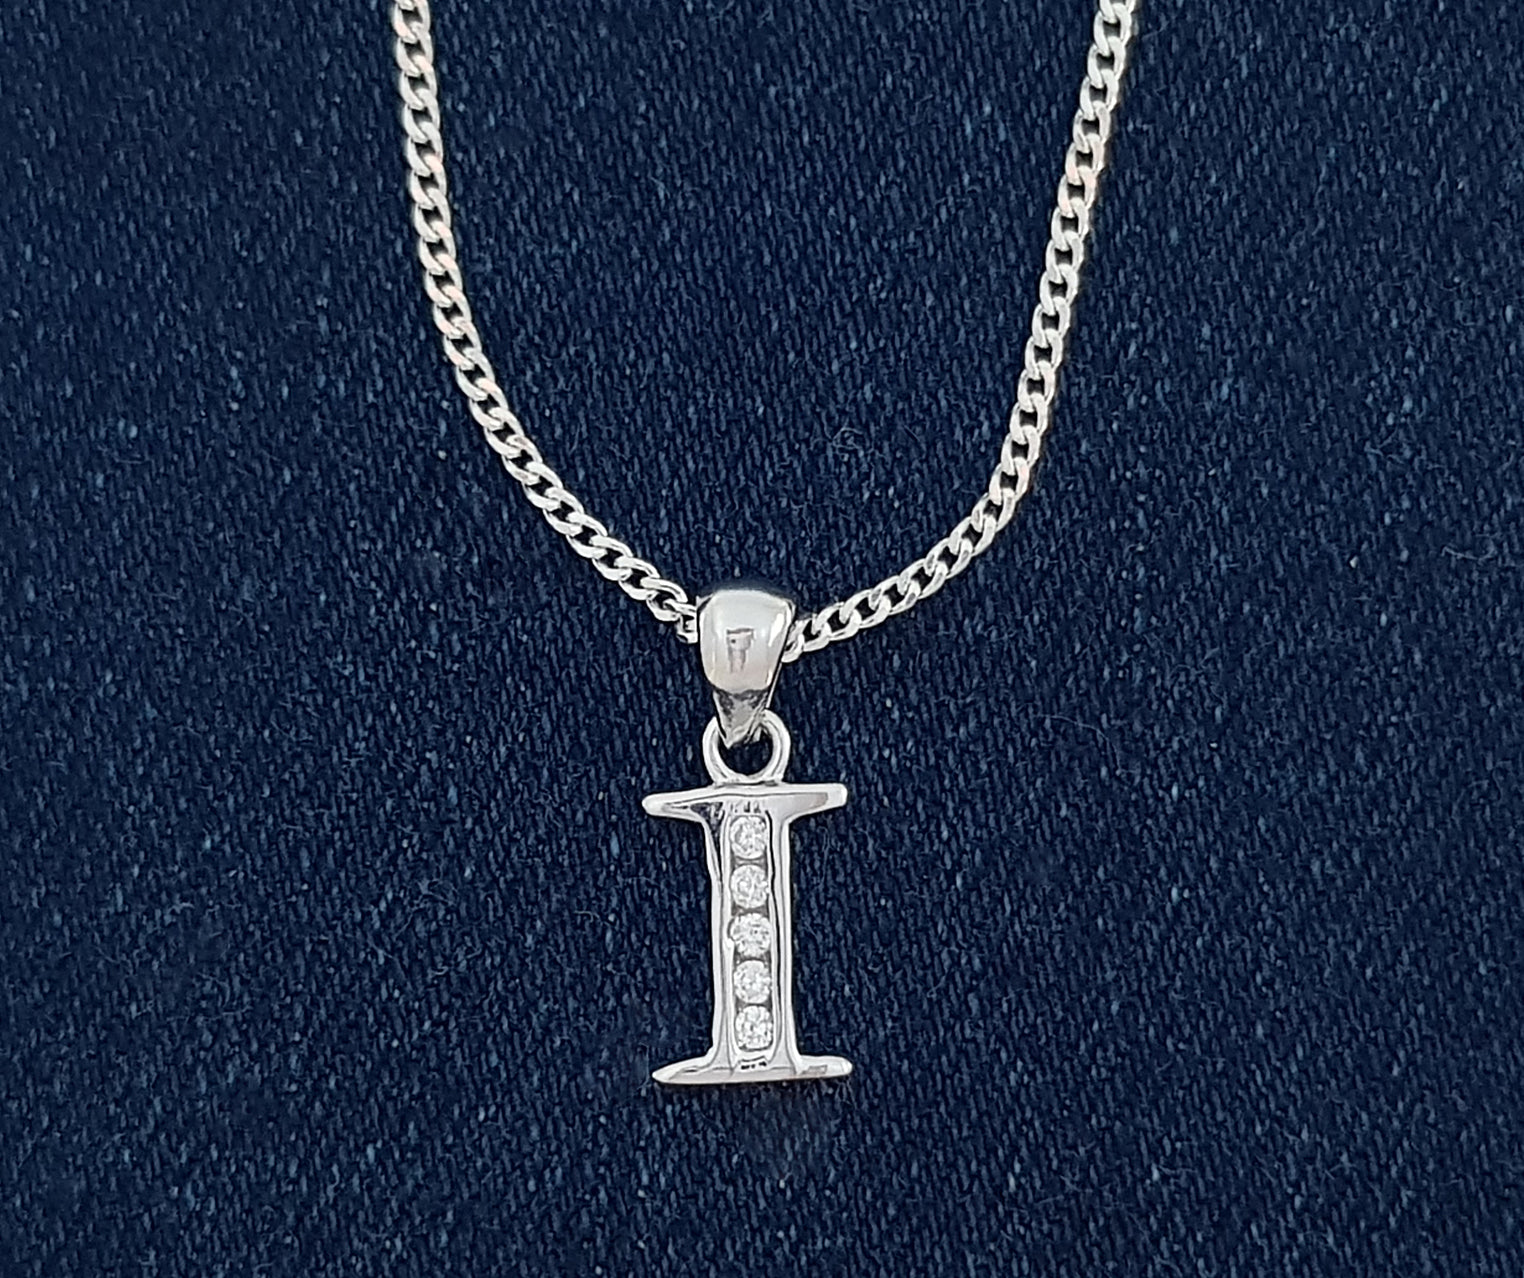 Sterling Silver Initial with Cubic Zirconia Stones- "I" Initial or Letter